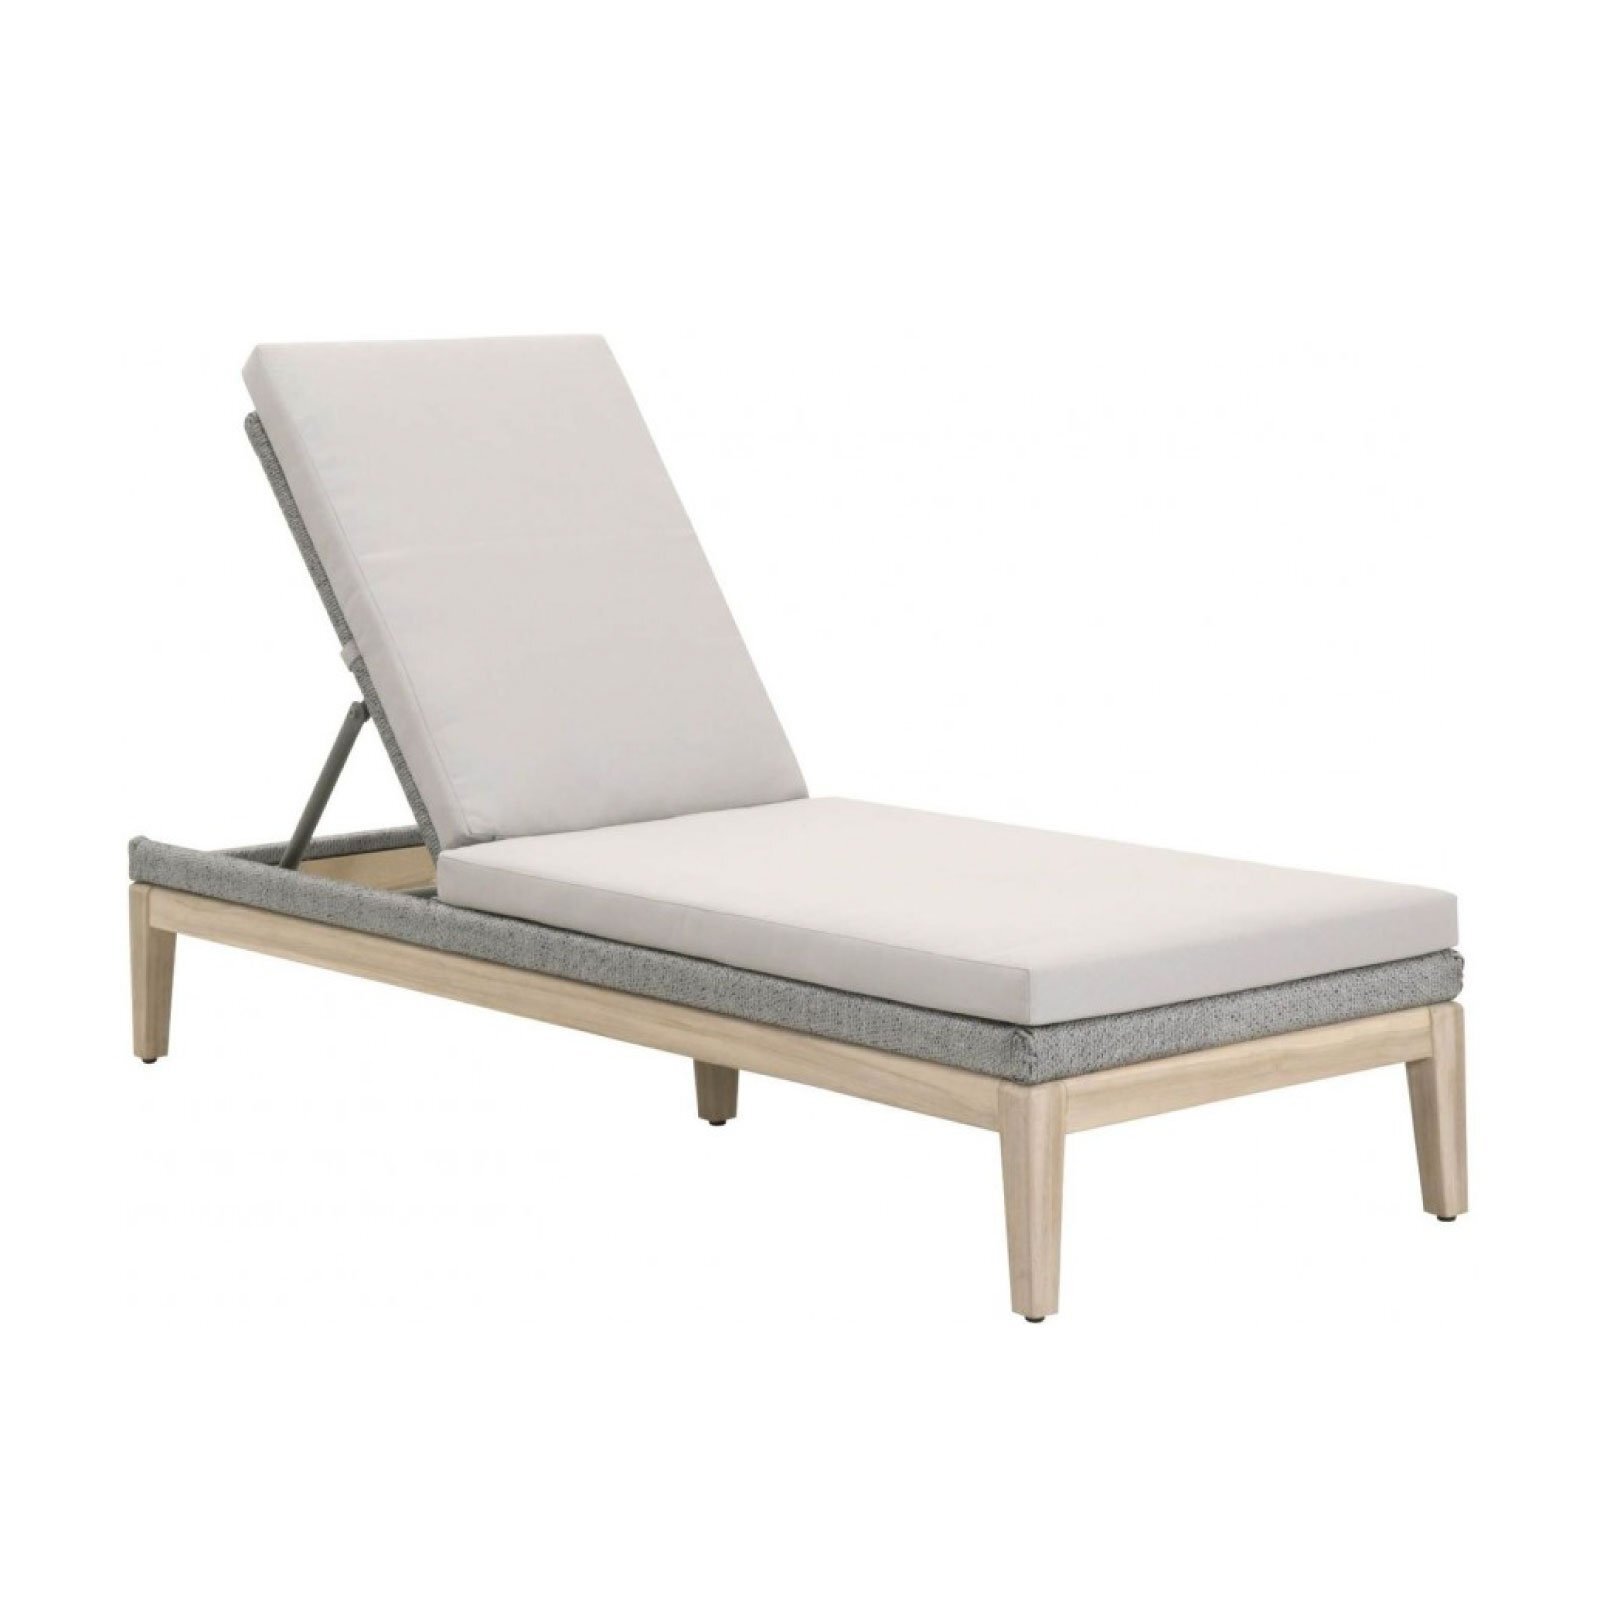 Newport Outdoor Chaise